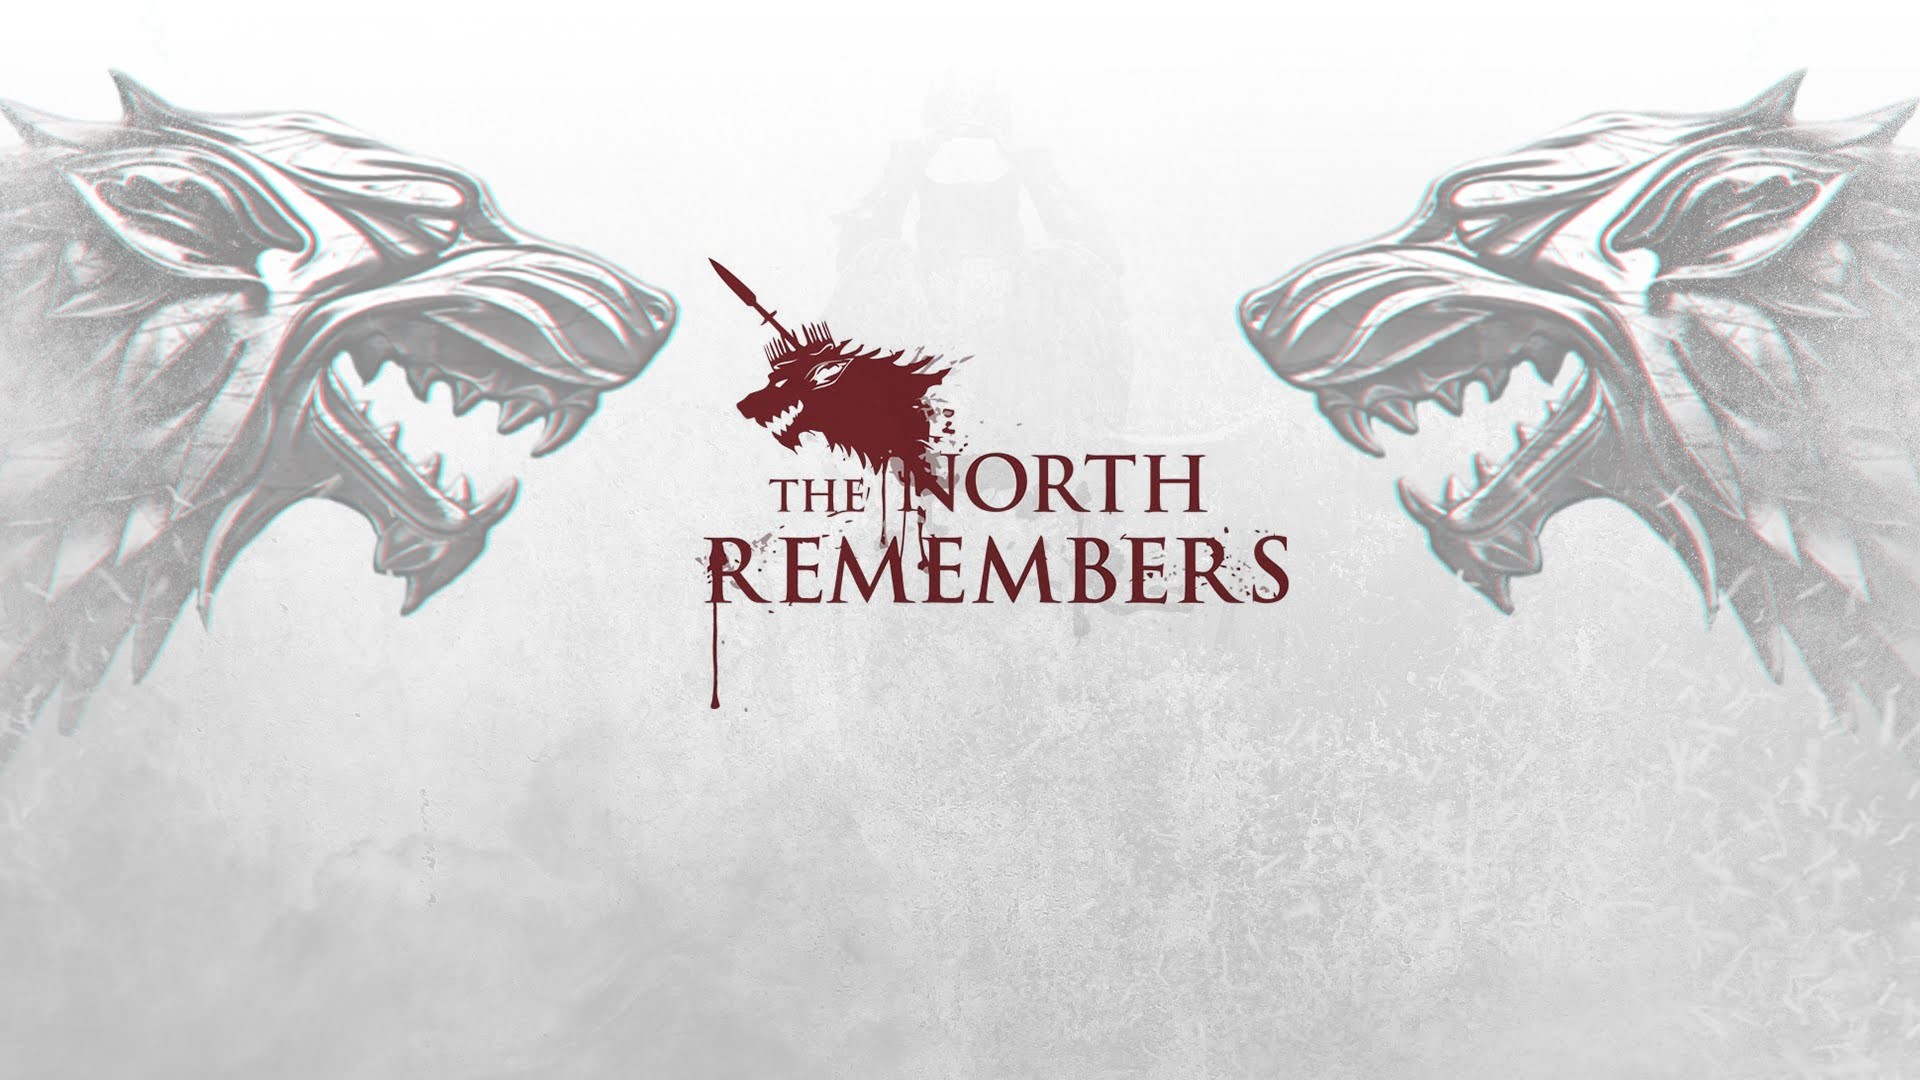 The North Remembers Wallpaper Image